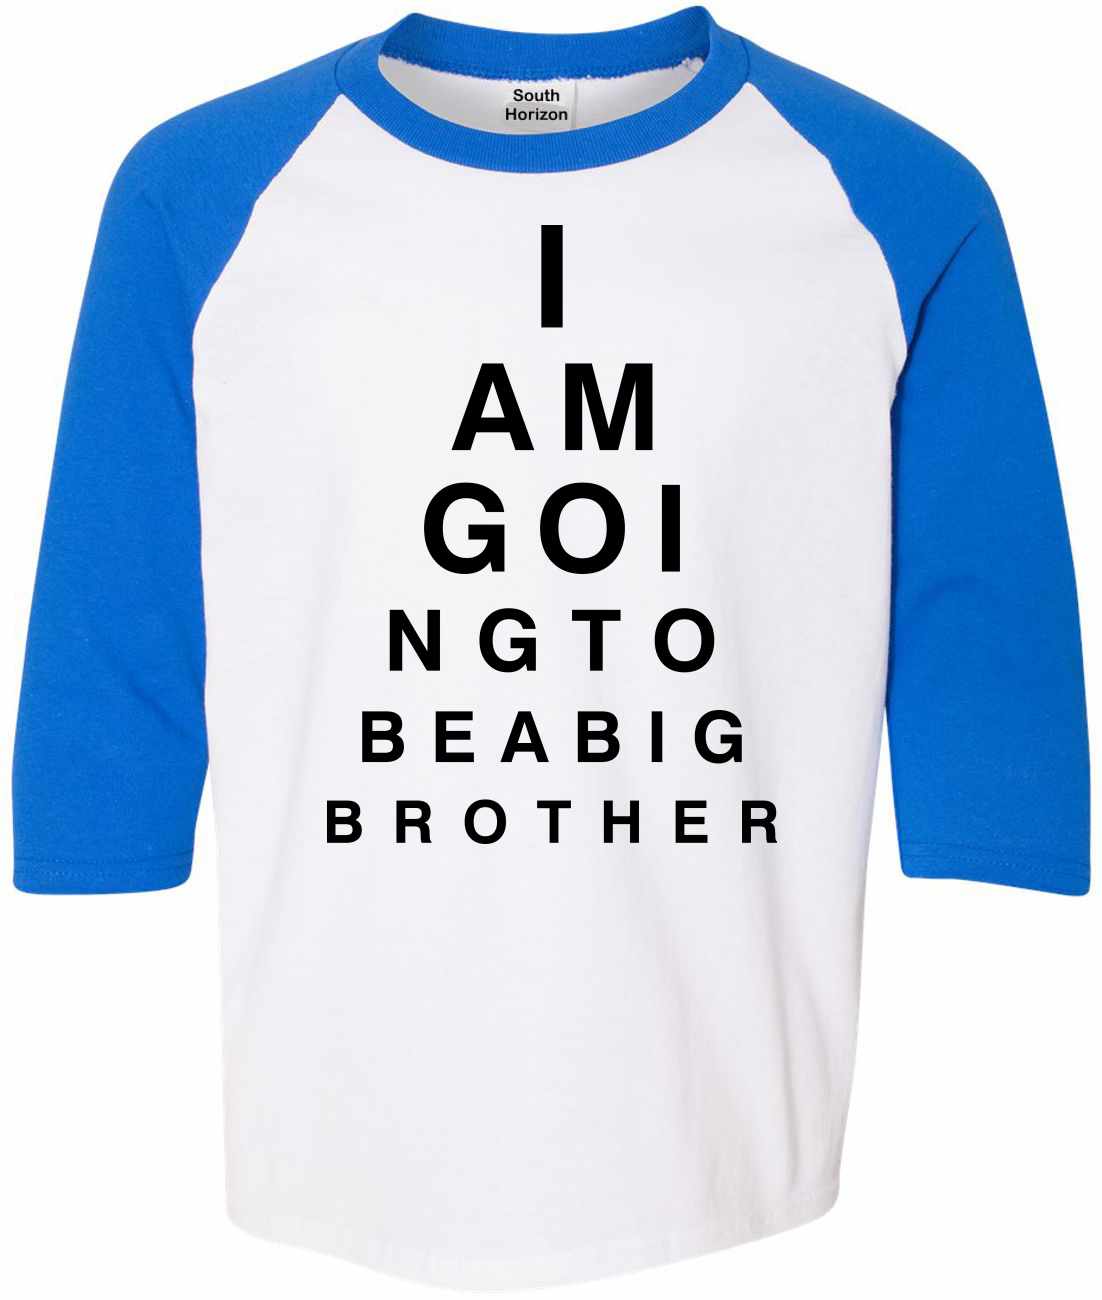 I AM GOING TO BE BIG BROTHER EYE CHART on Youth Baseball Shirt